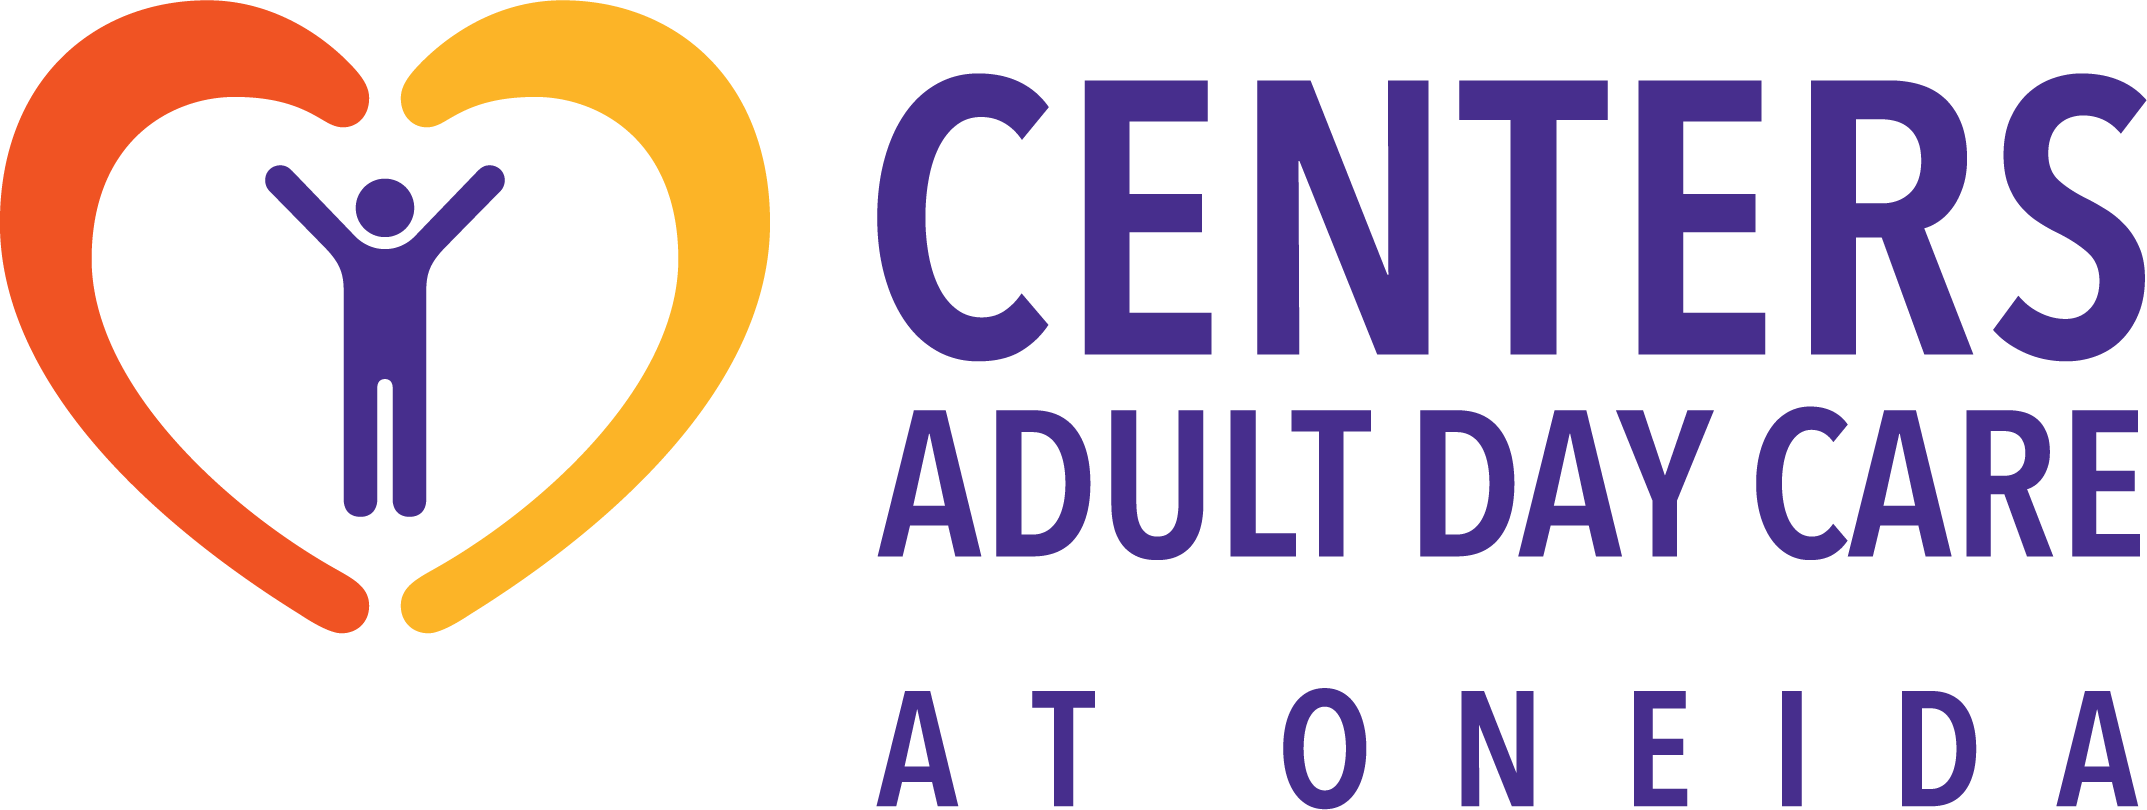 Centers Adult Day Care at Oneida Center logo